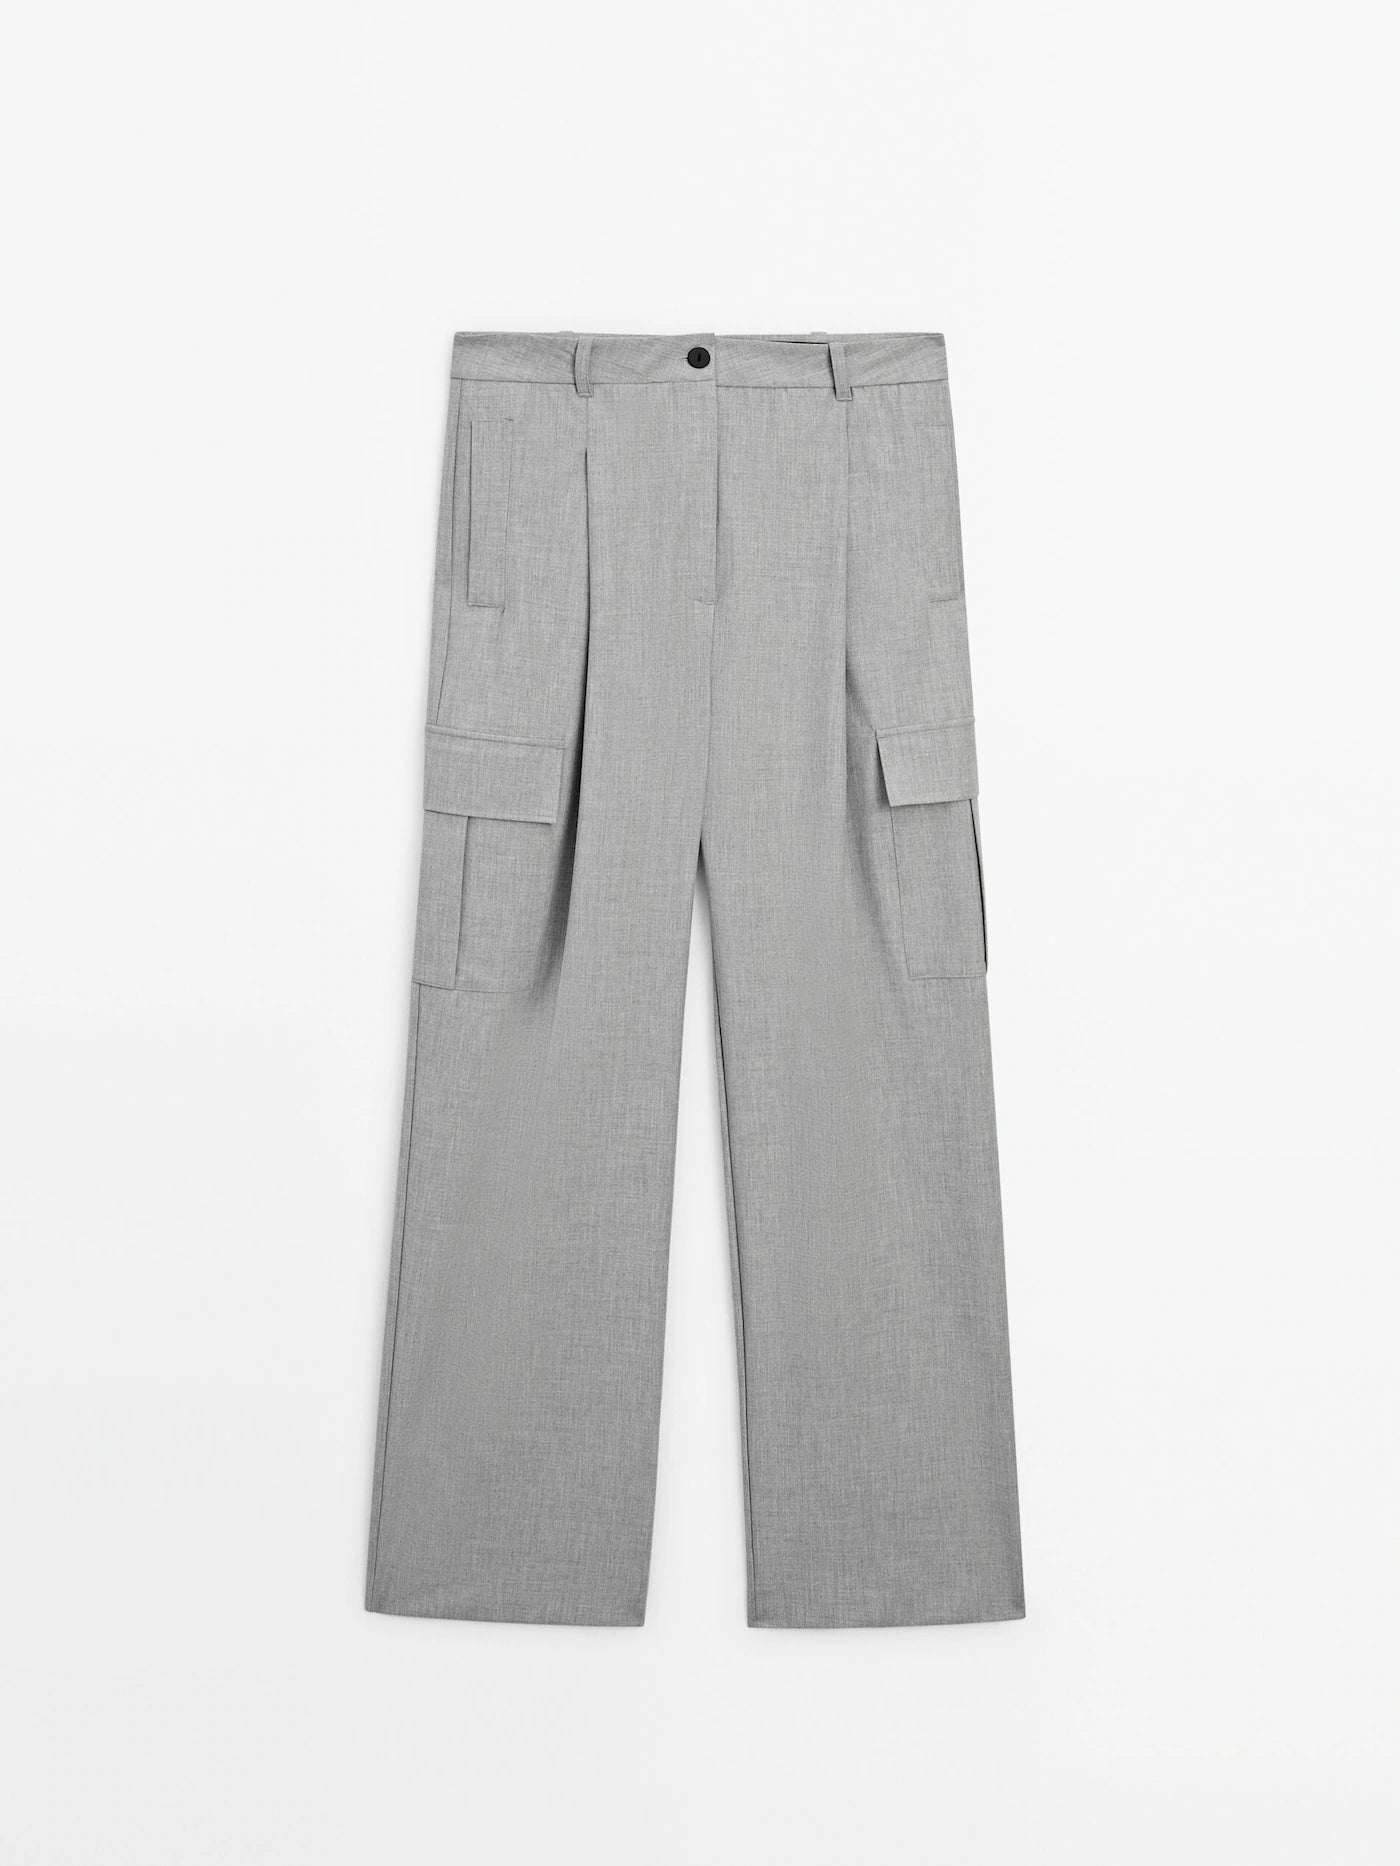 Darted cargo trousers